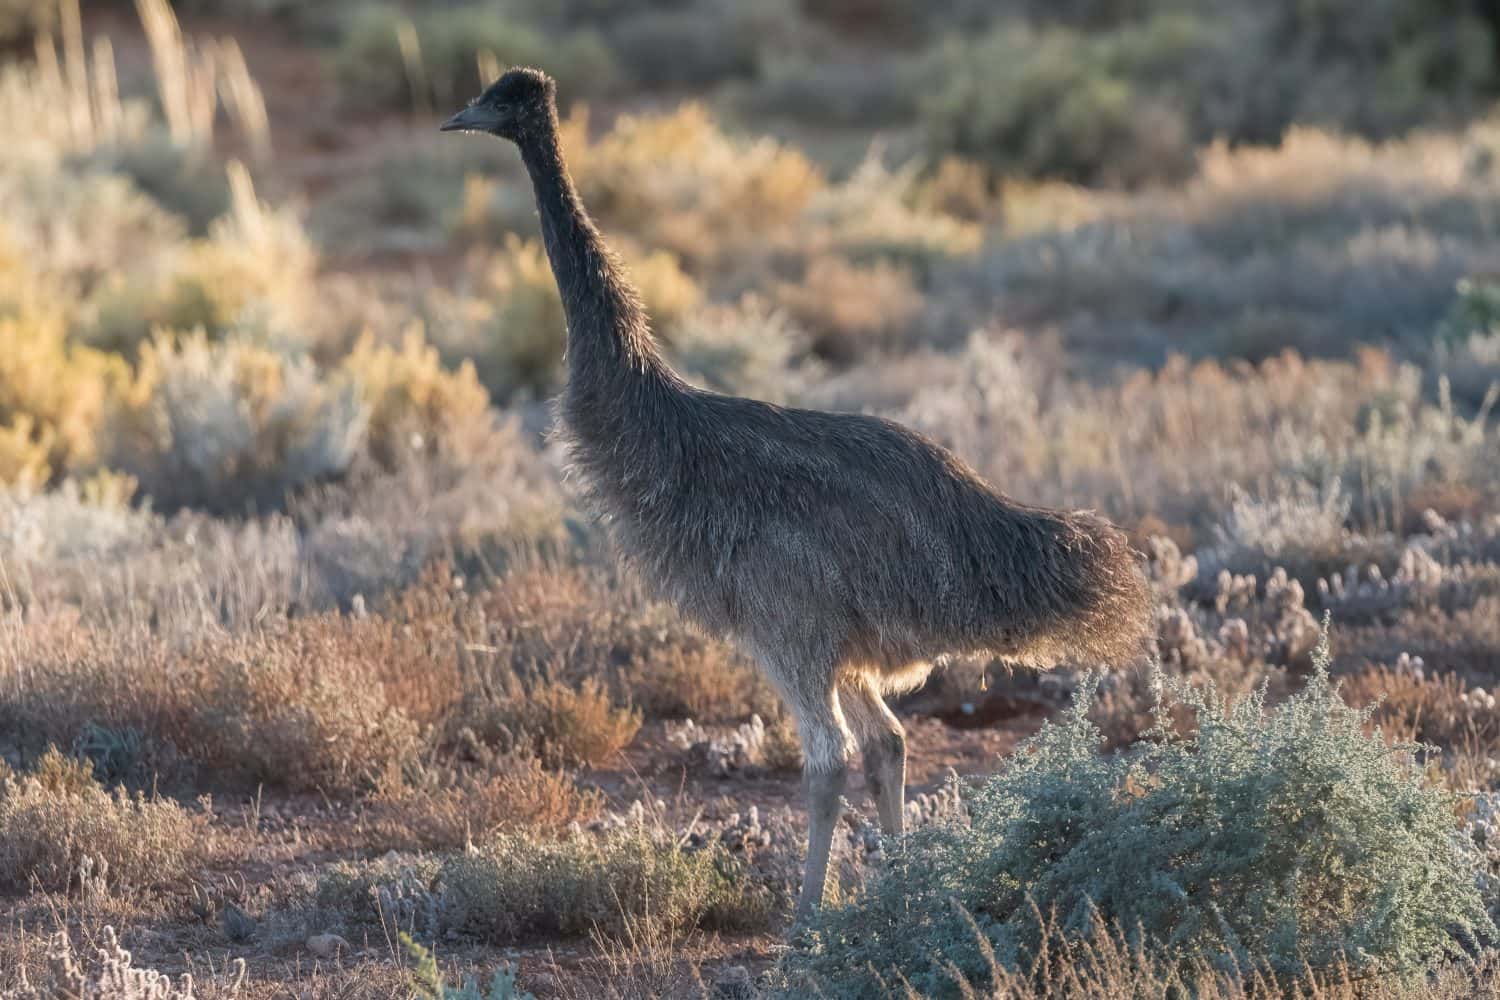 A juvenile Emu in the early morning light